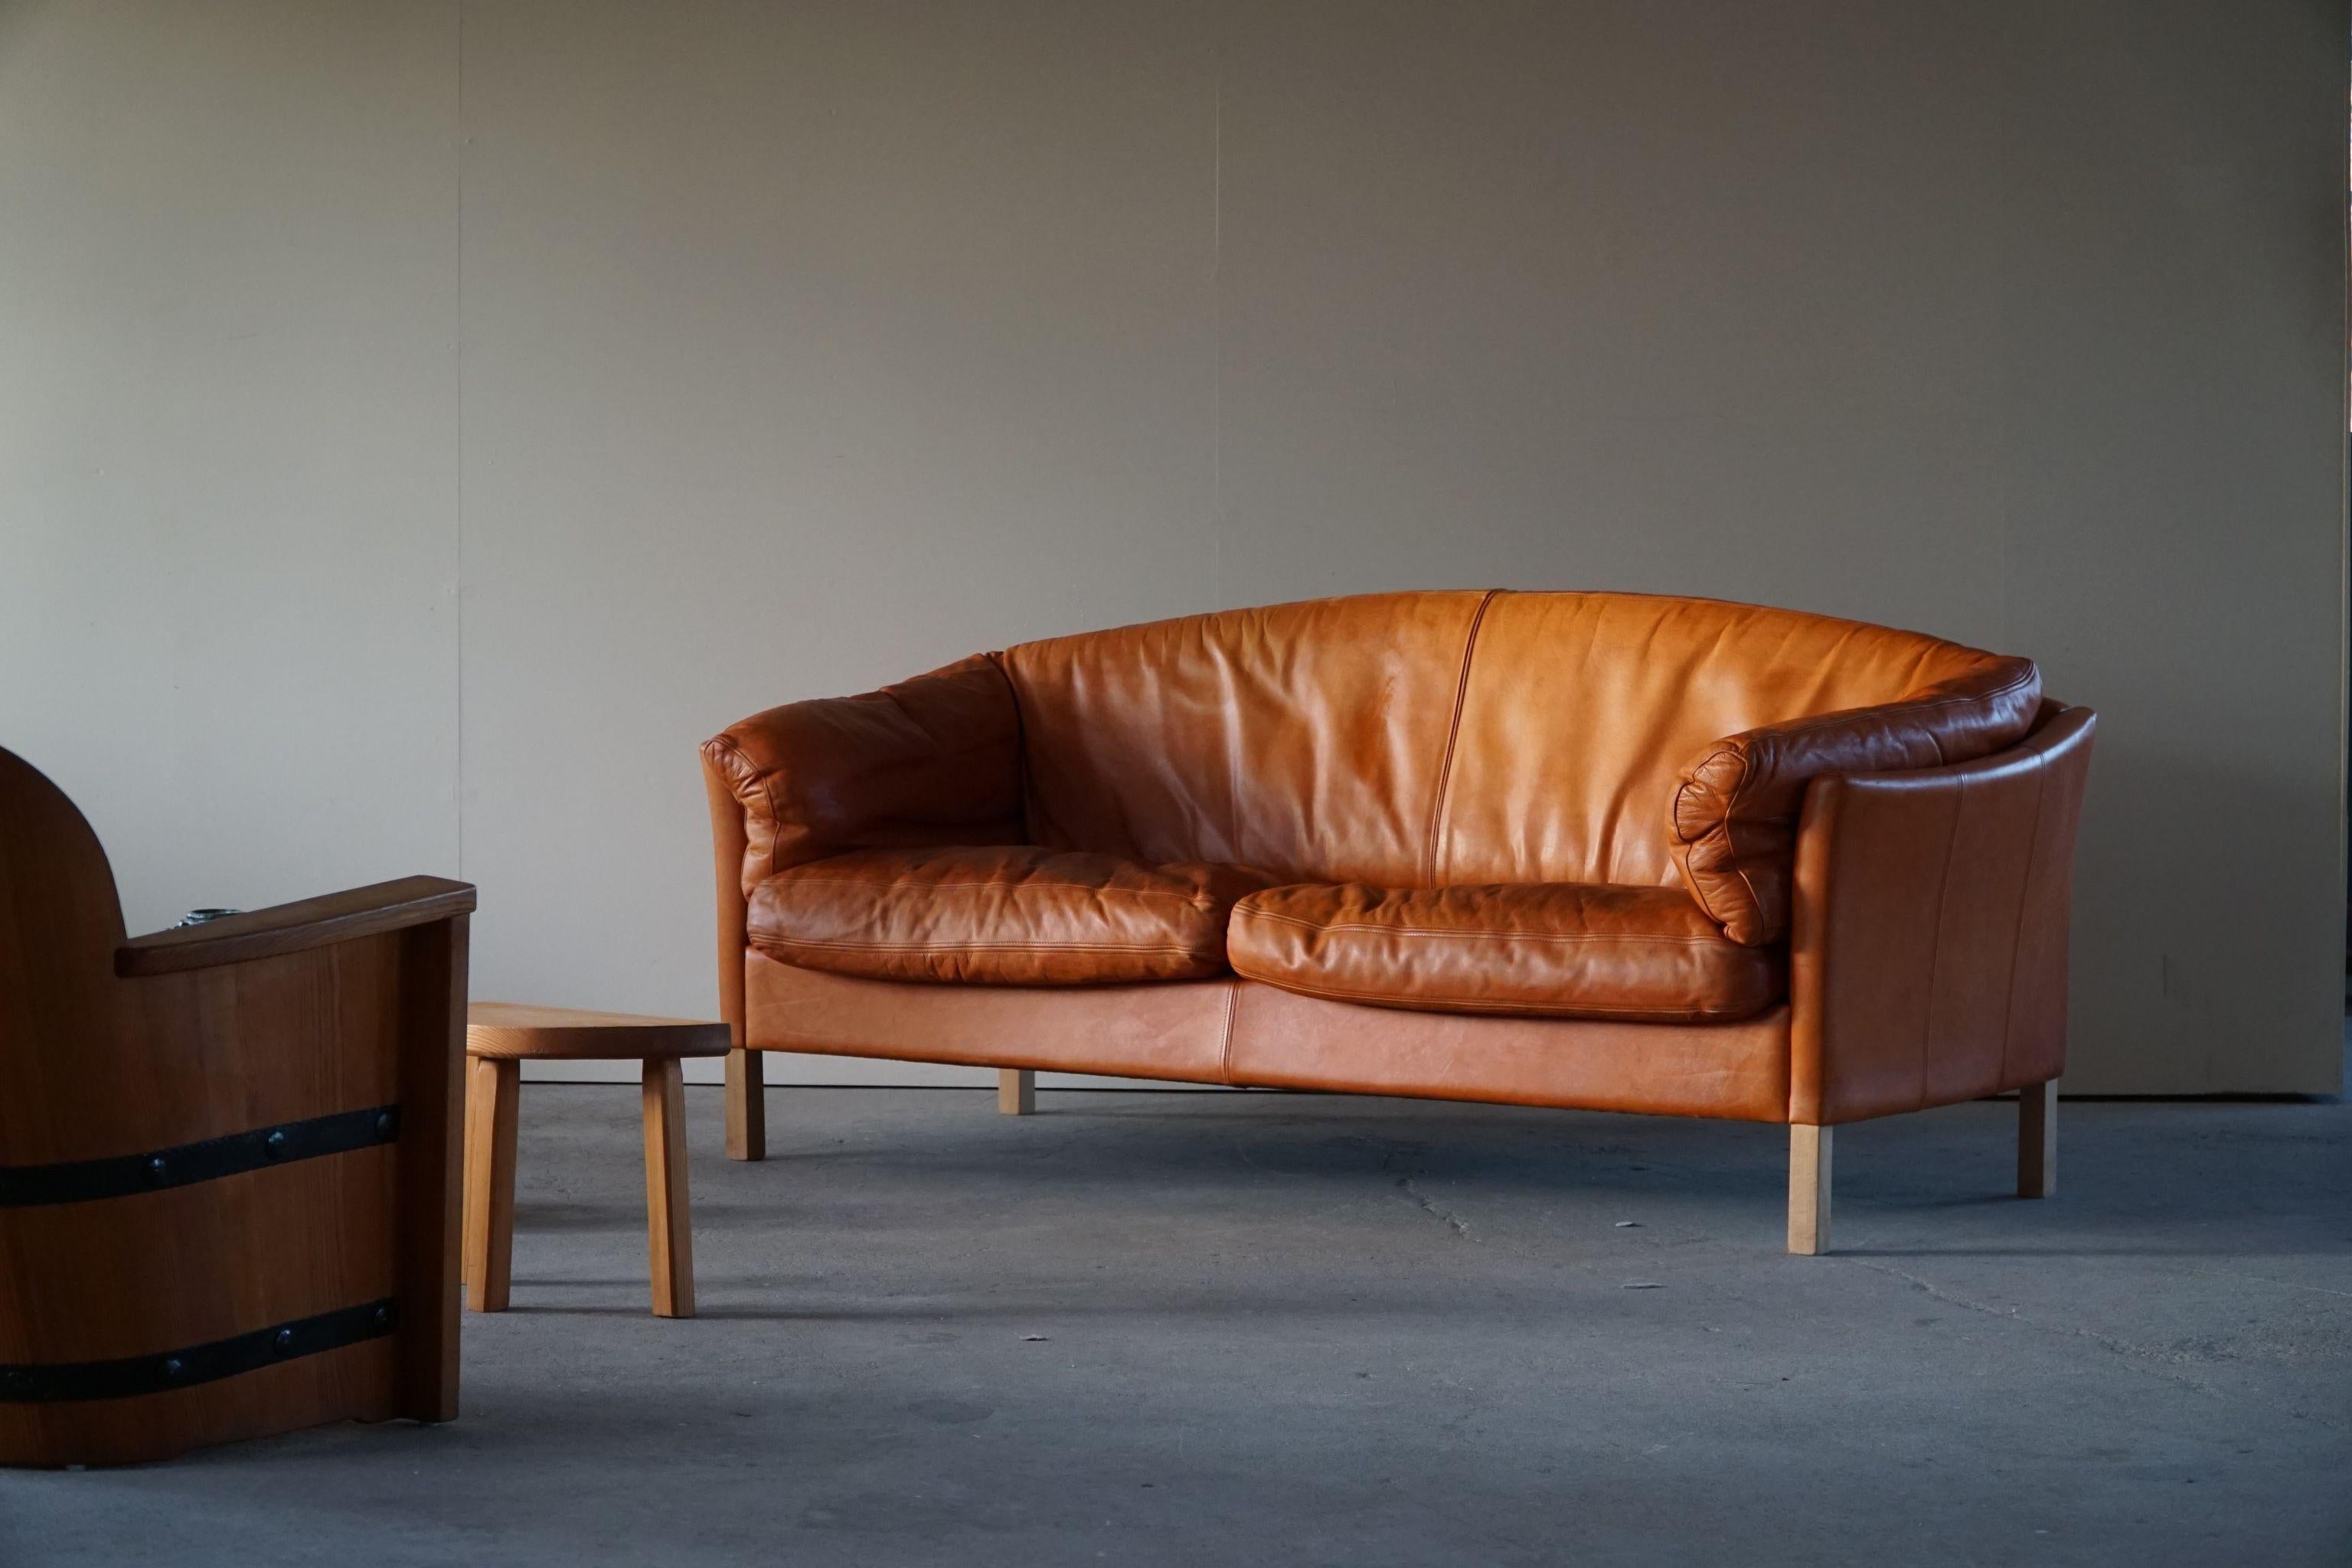 Mid-century Danish 2.5 seater sofa in cognac coloured leather, feets made in beech, Designed by Mogens Hansen for Odense Møbelfabrik in 1970s. Model 535.

Nice curves and a stunning warm patina in this classic danish sofa.

With a heavy focus on